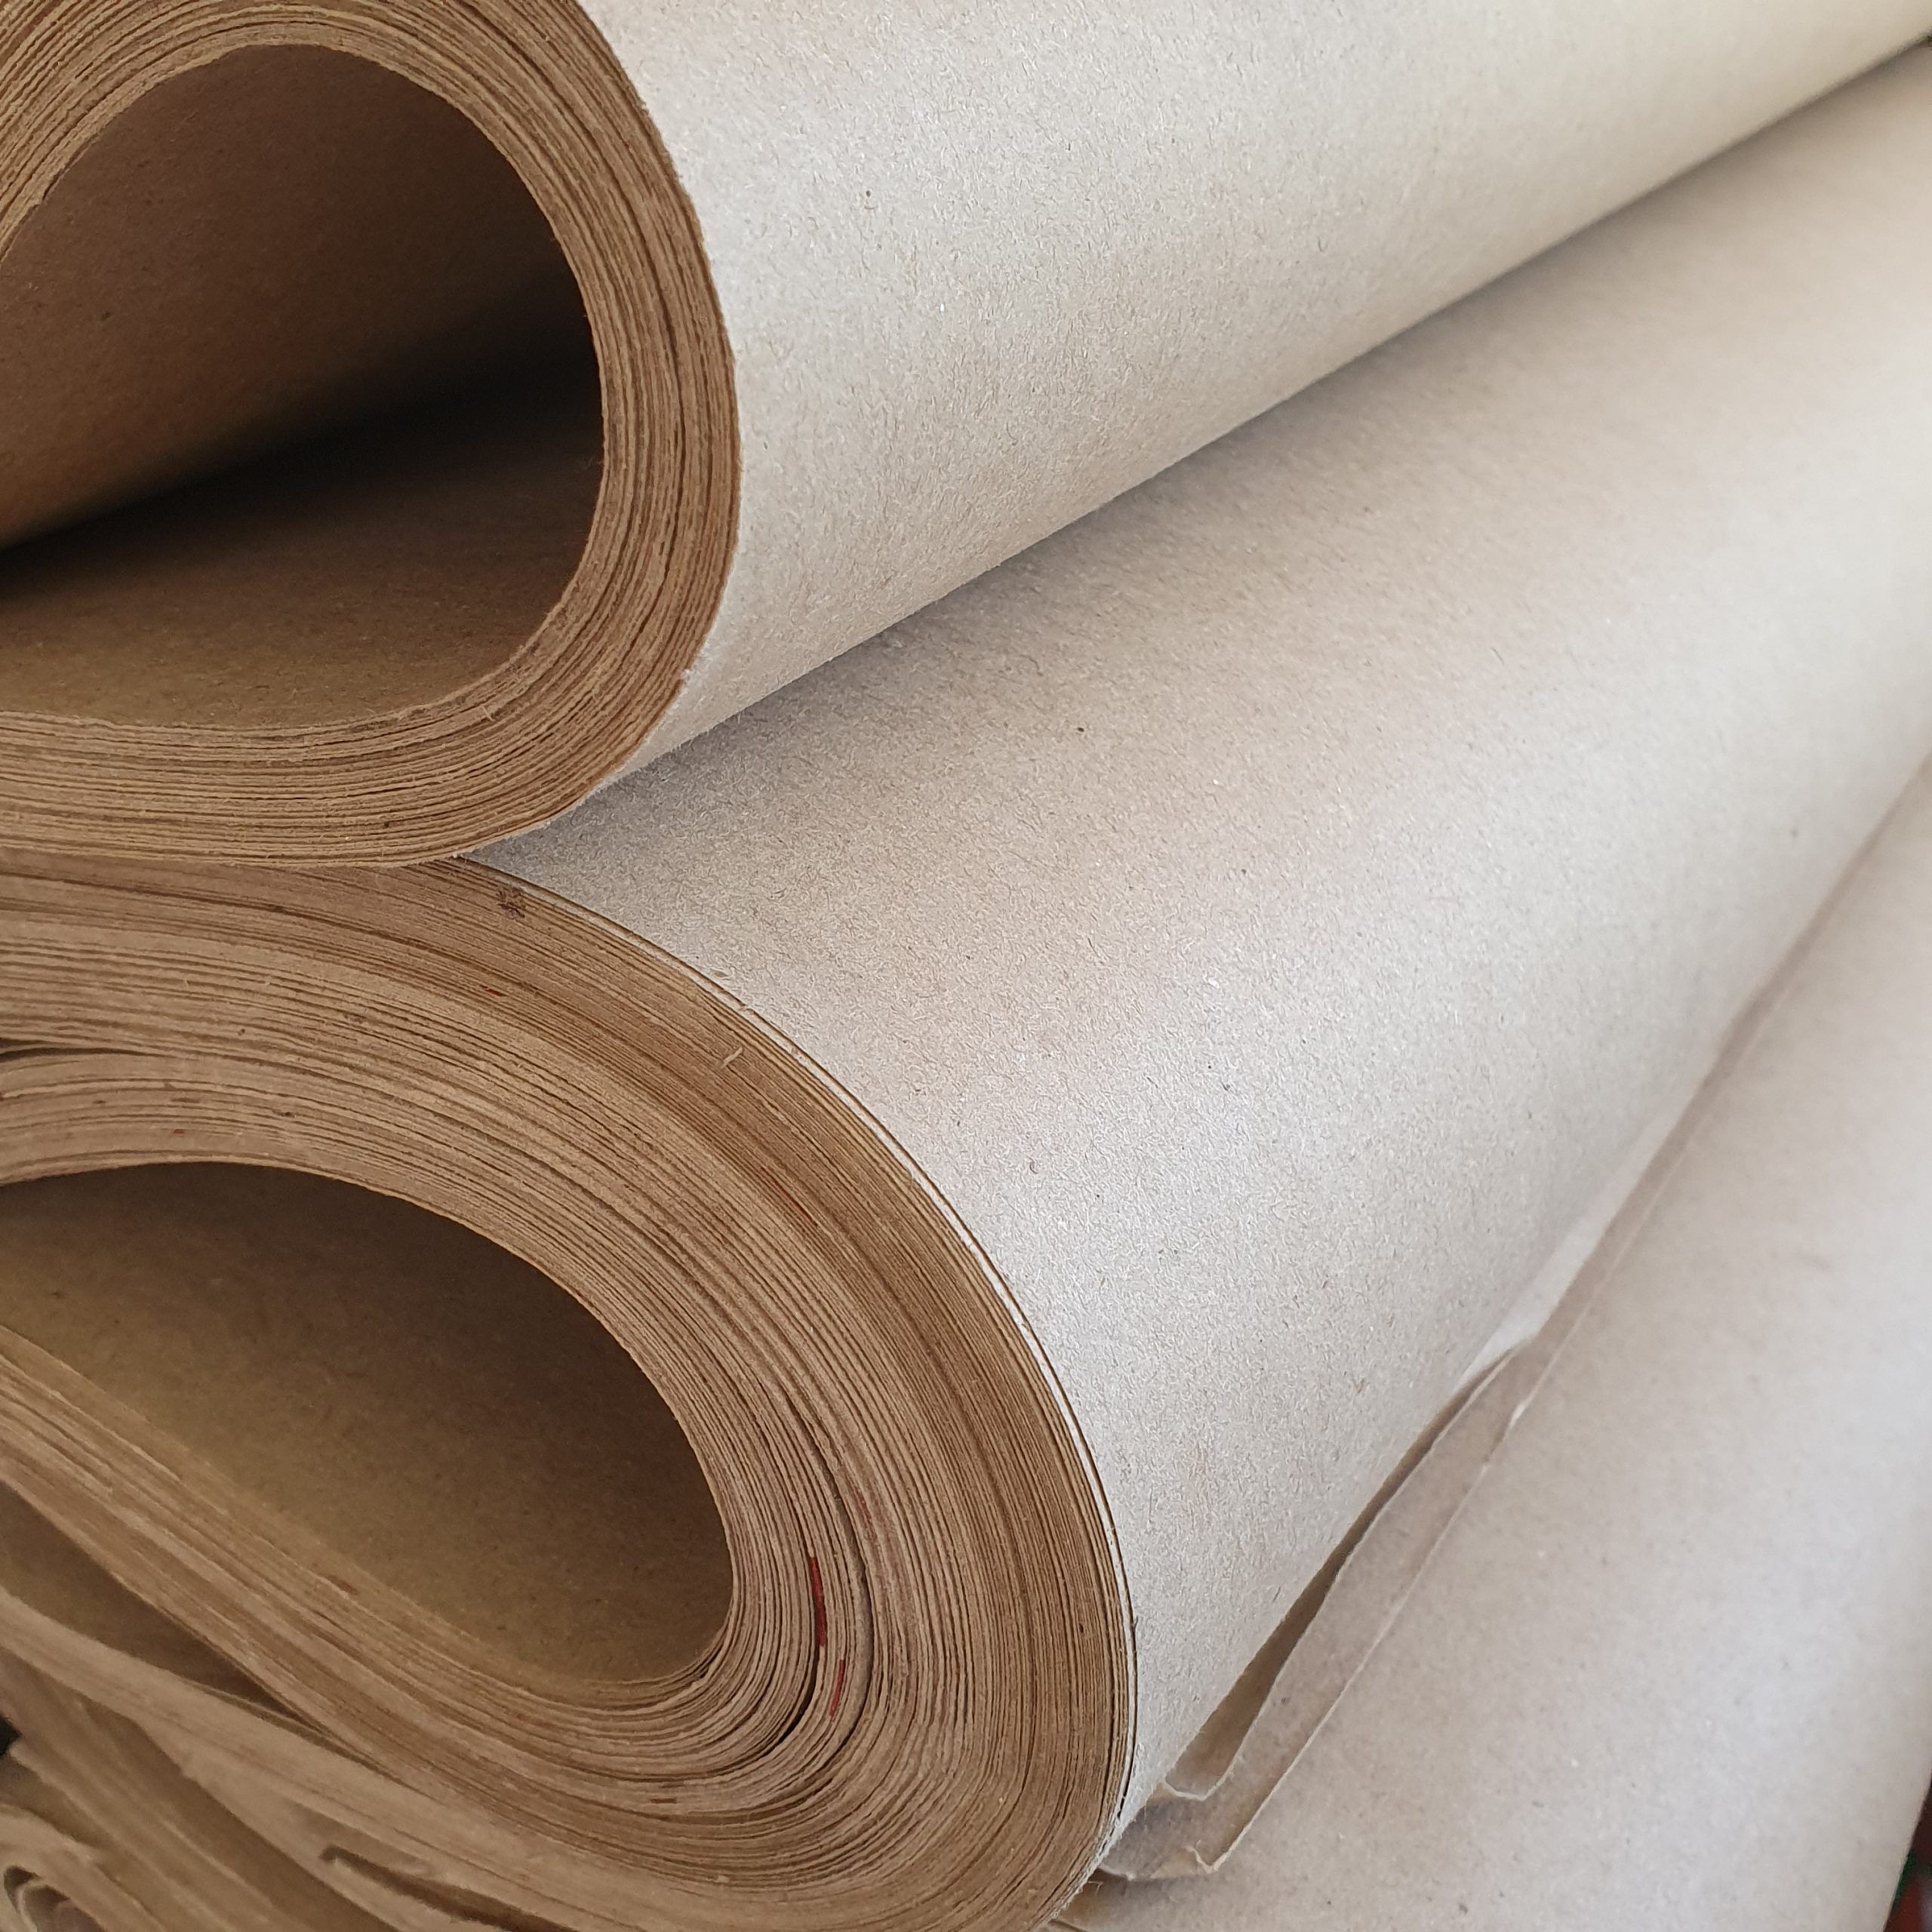 Kraft Paper Roll (12 sheets) - Ma'am and Mom's